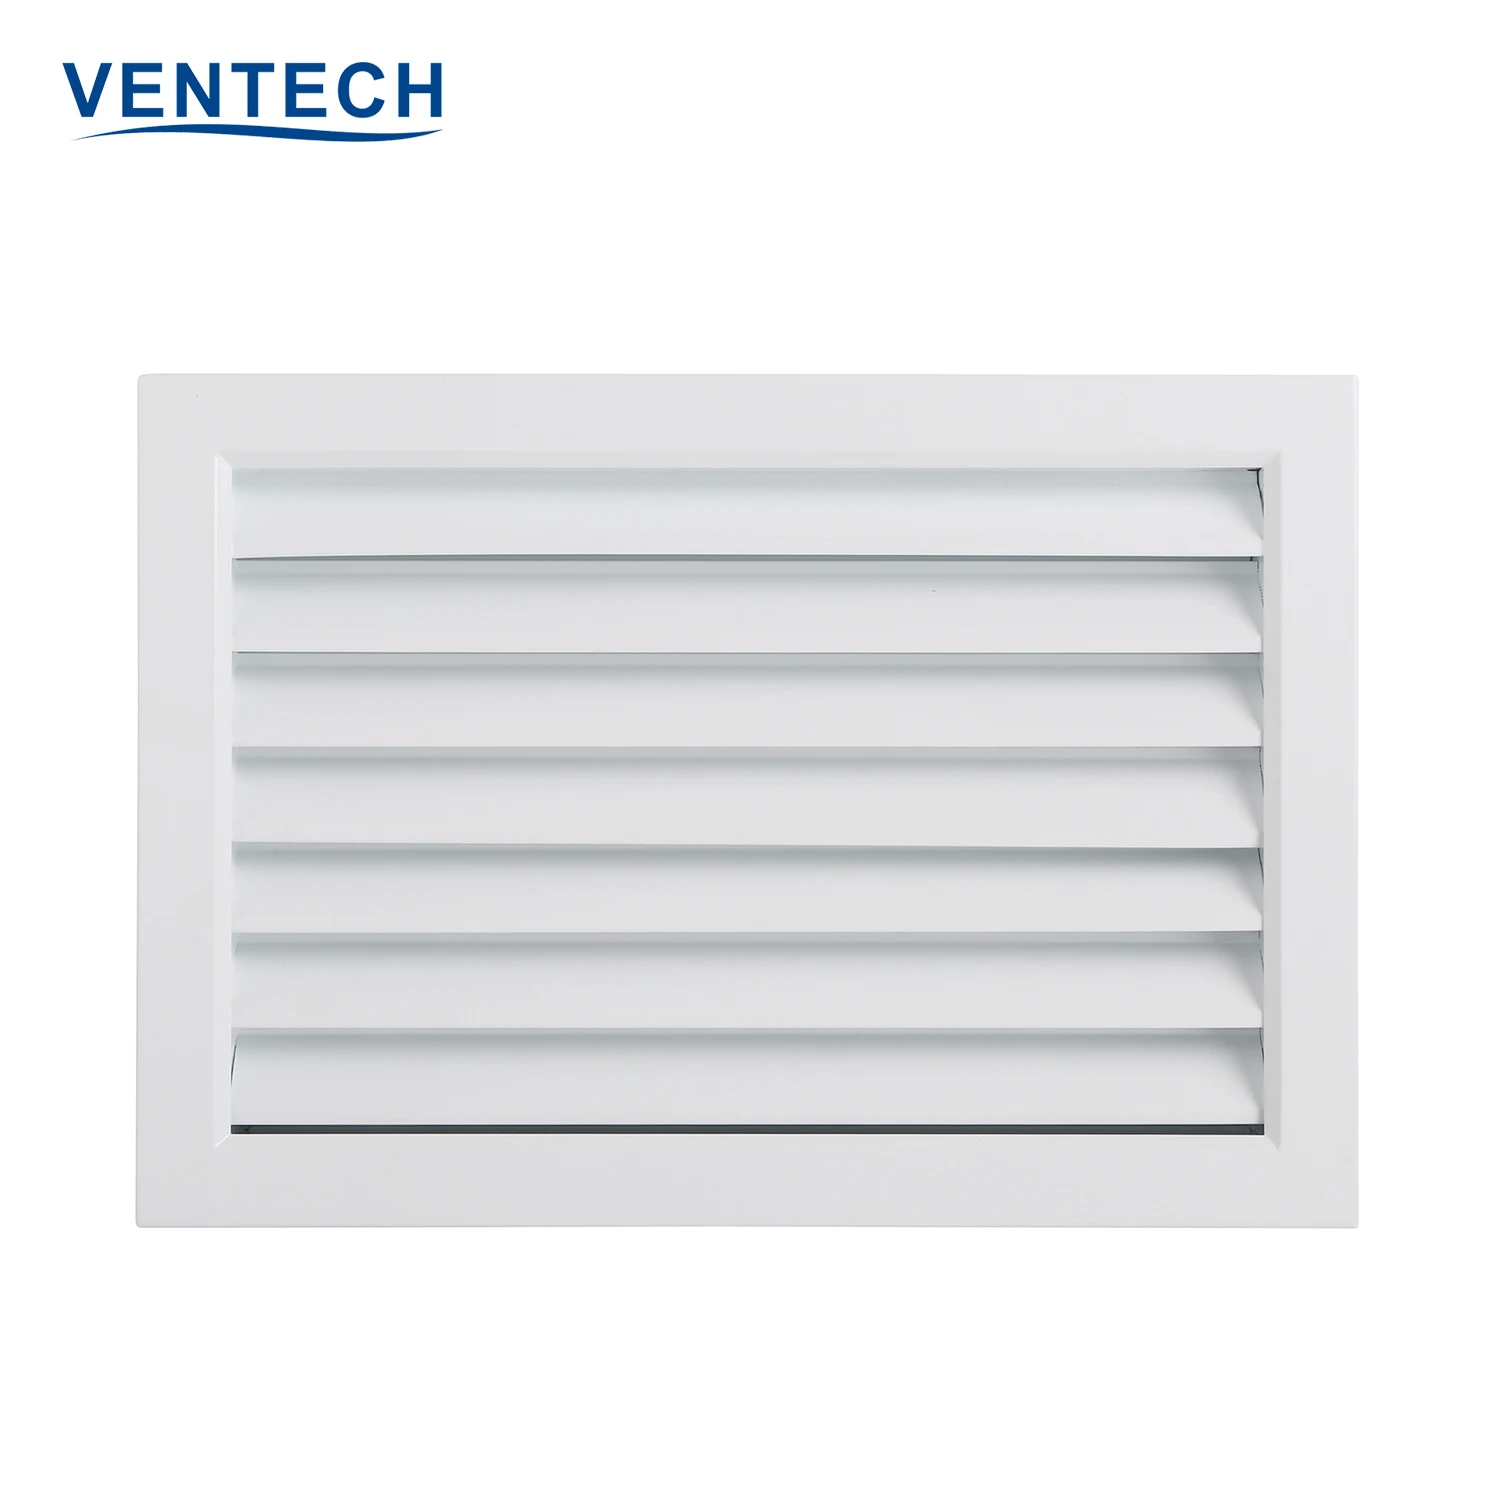 Hvac System Panel Ceiling Access Galvanized Teel Grill Folding Door For Ventilation